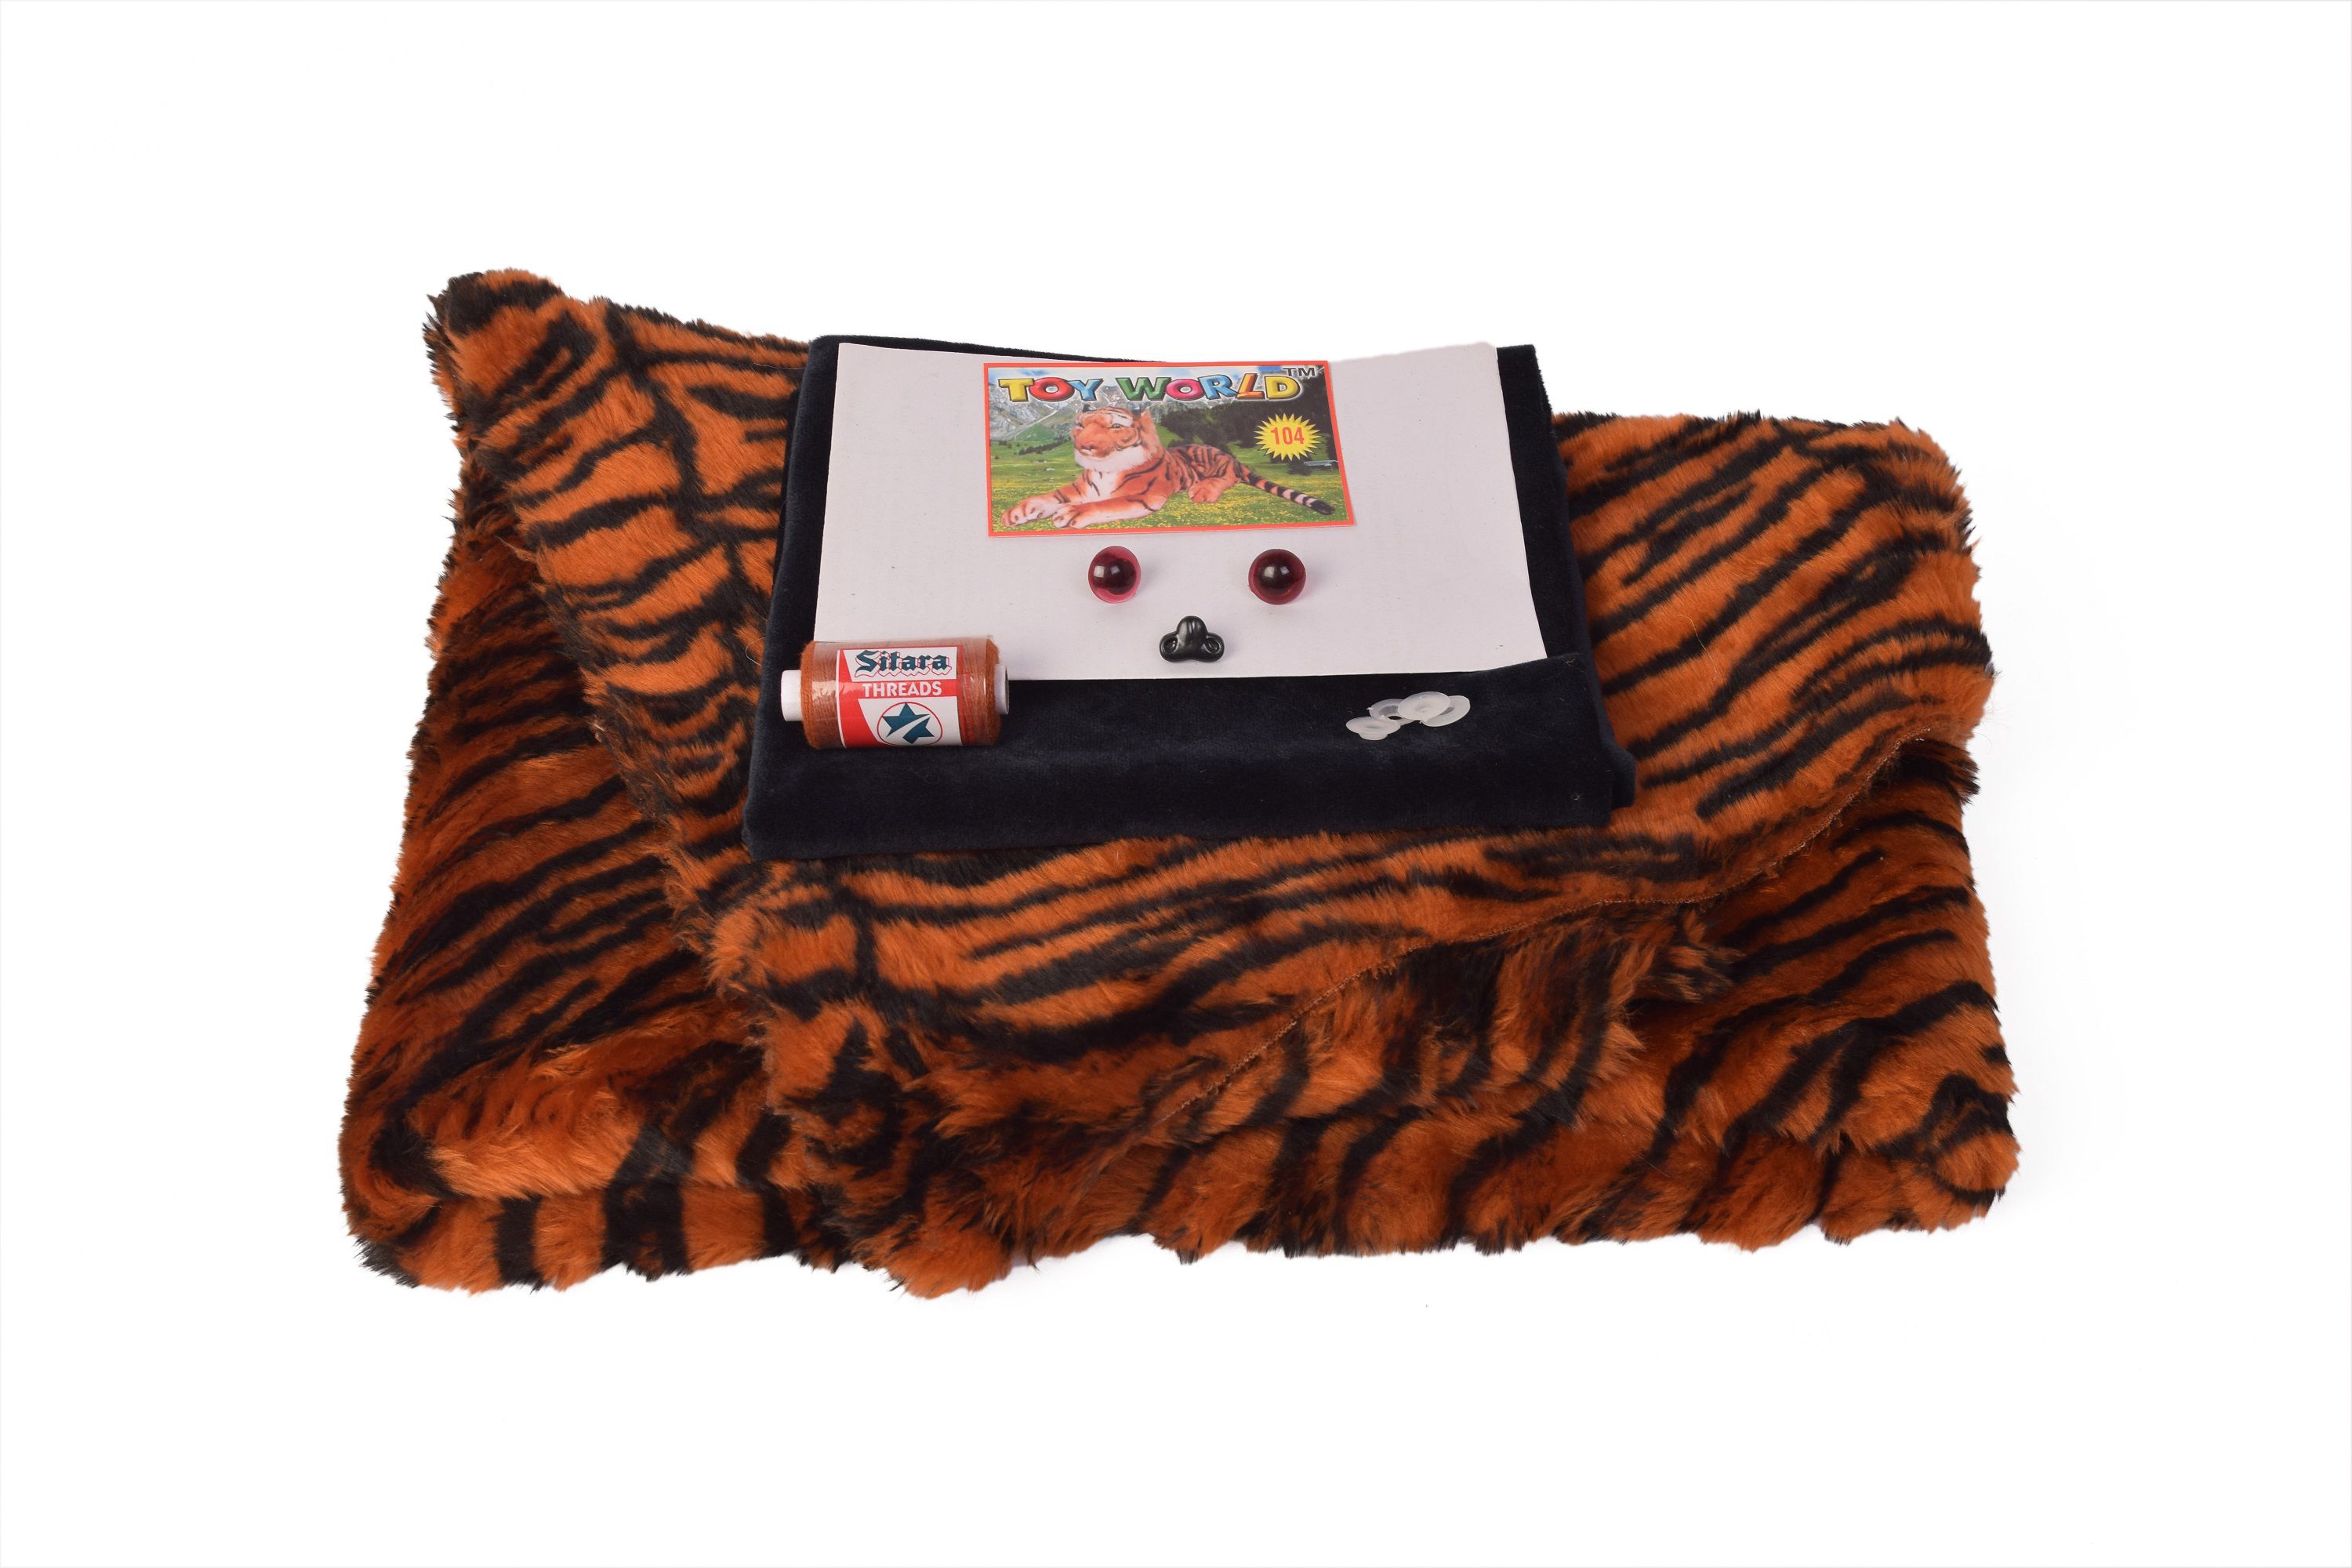     			Soft Toys Tiger Making Kit Includes Fur Cloth , Acrylic Cloth, 2 Eyes 1 Nose , Needle Set, Reel, Draft For Making Tiger